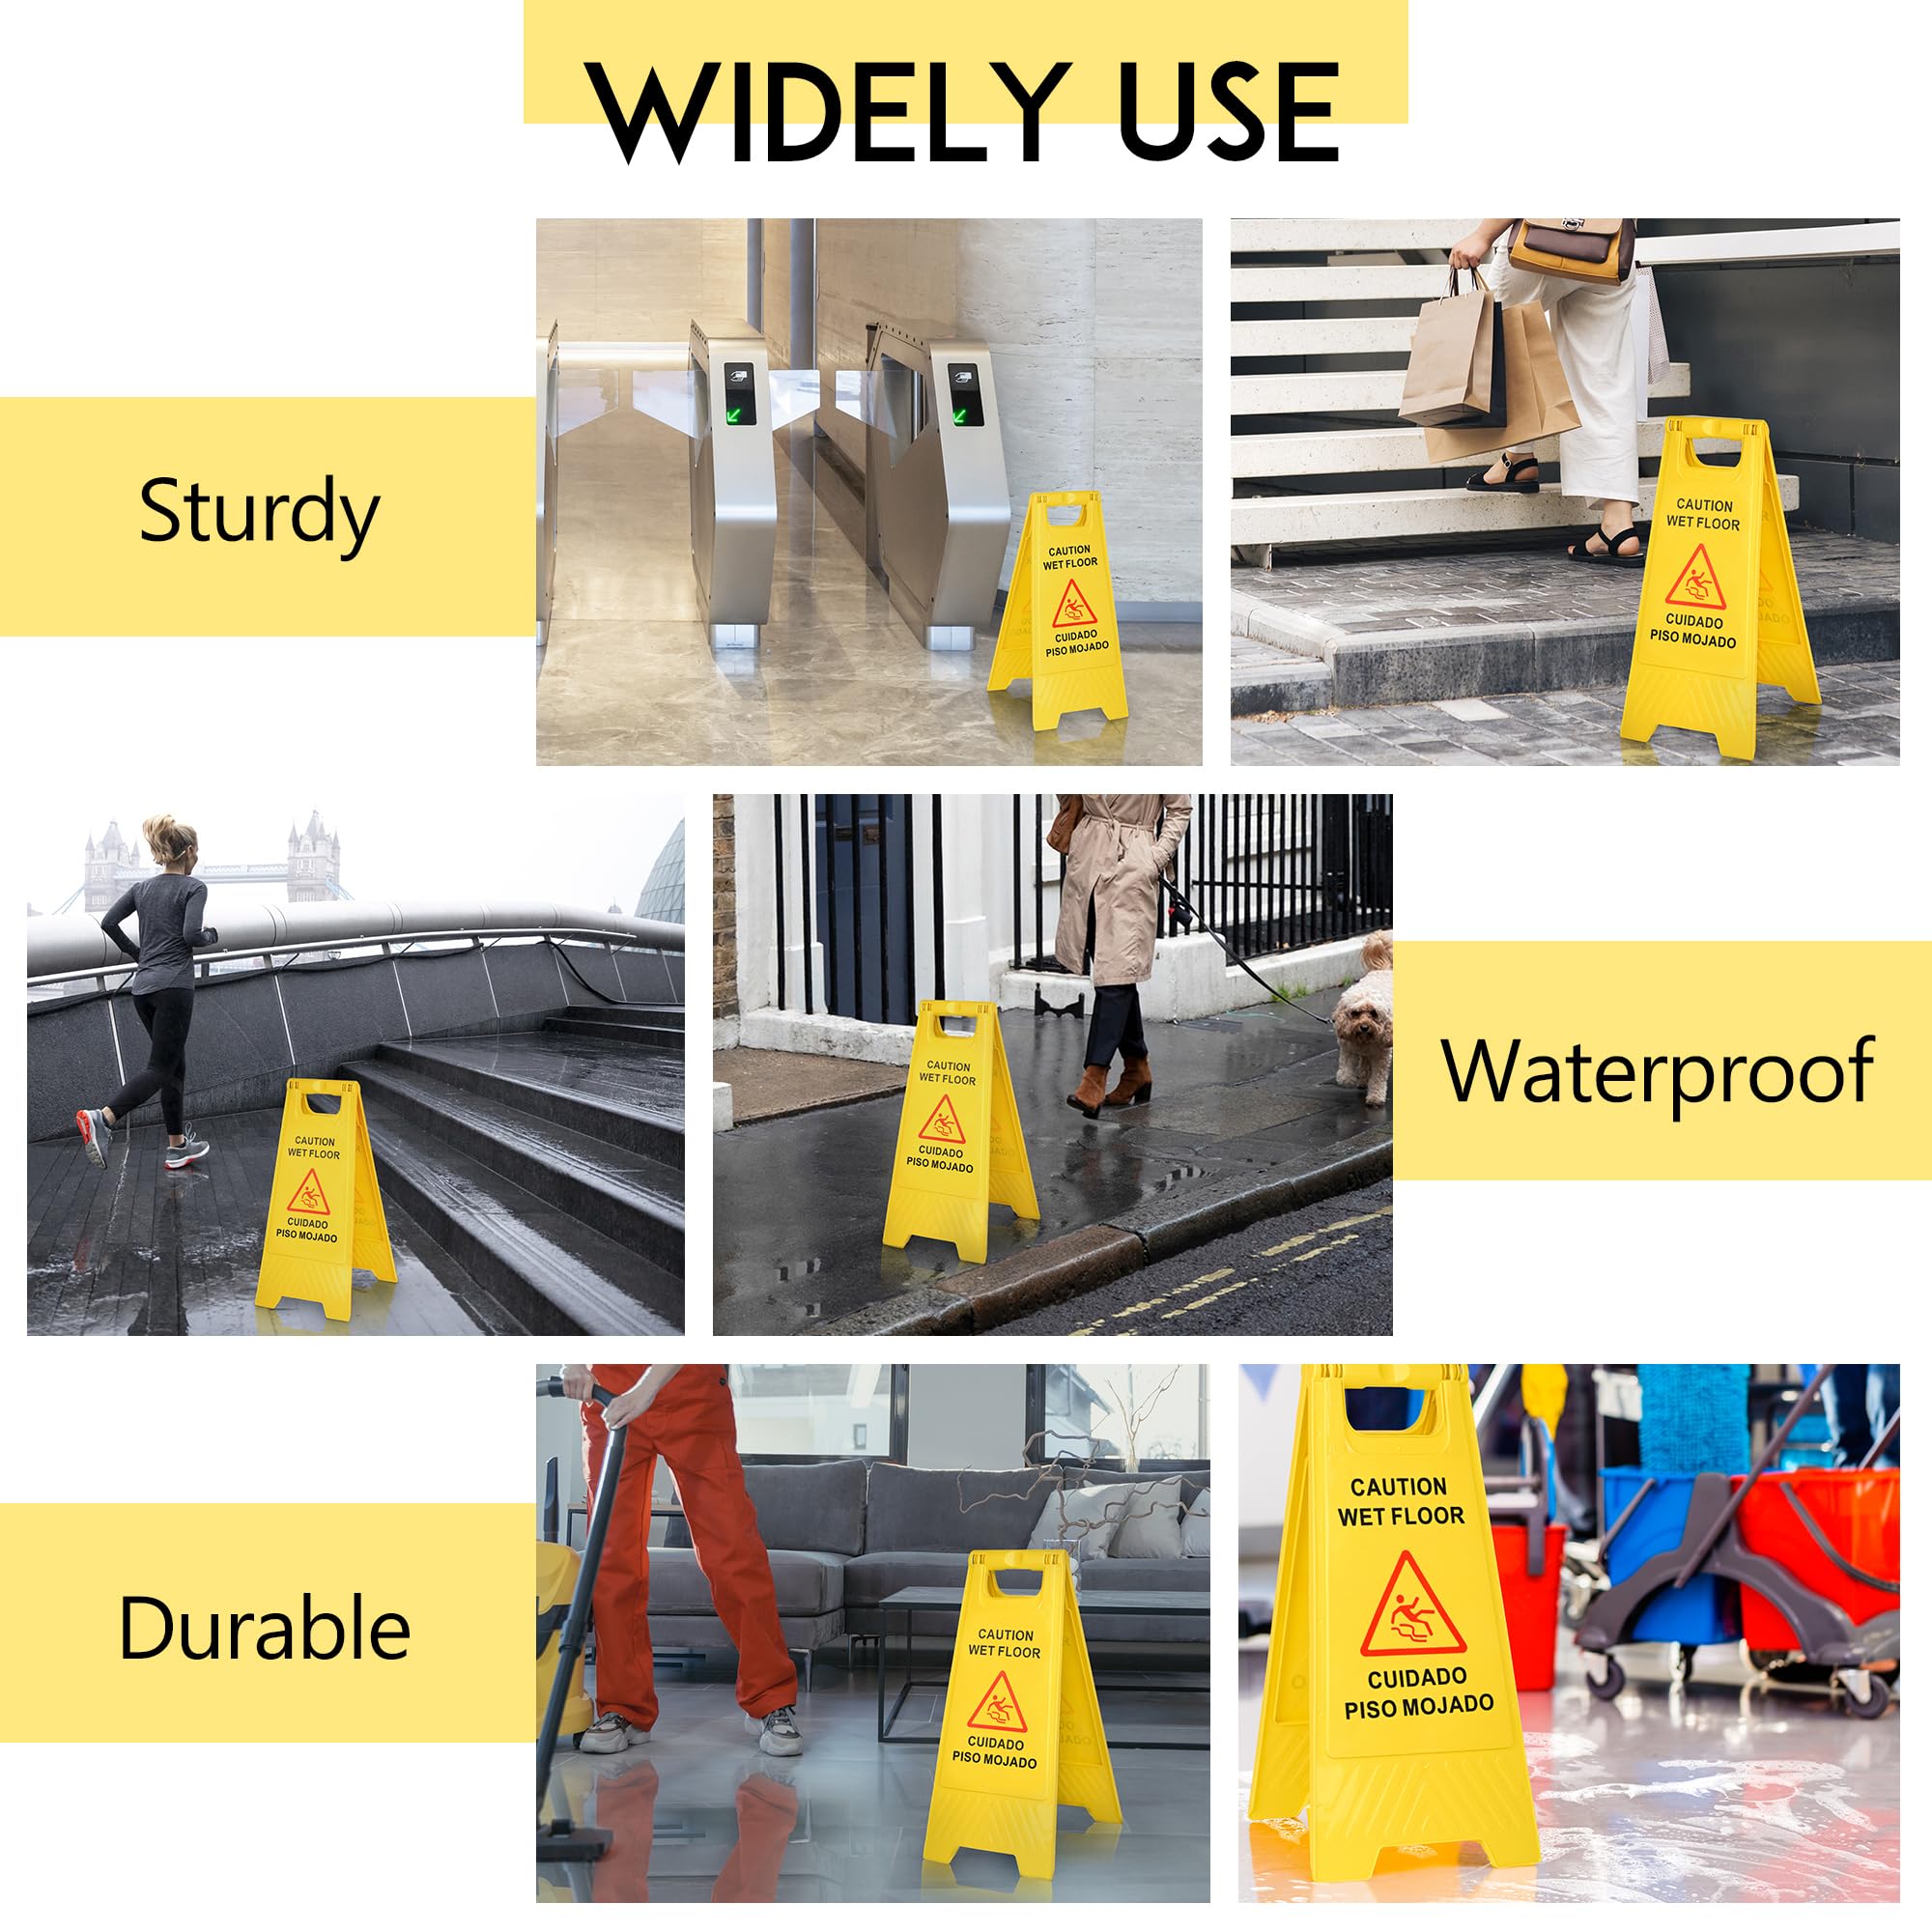 KURPHOYIN Wet Floor Sign 4-Packs 2-Sided Caution Sign Slippery when Wet Sign Commercial A Frame 24 Inches Height